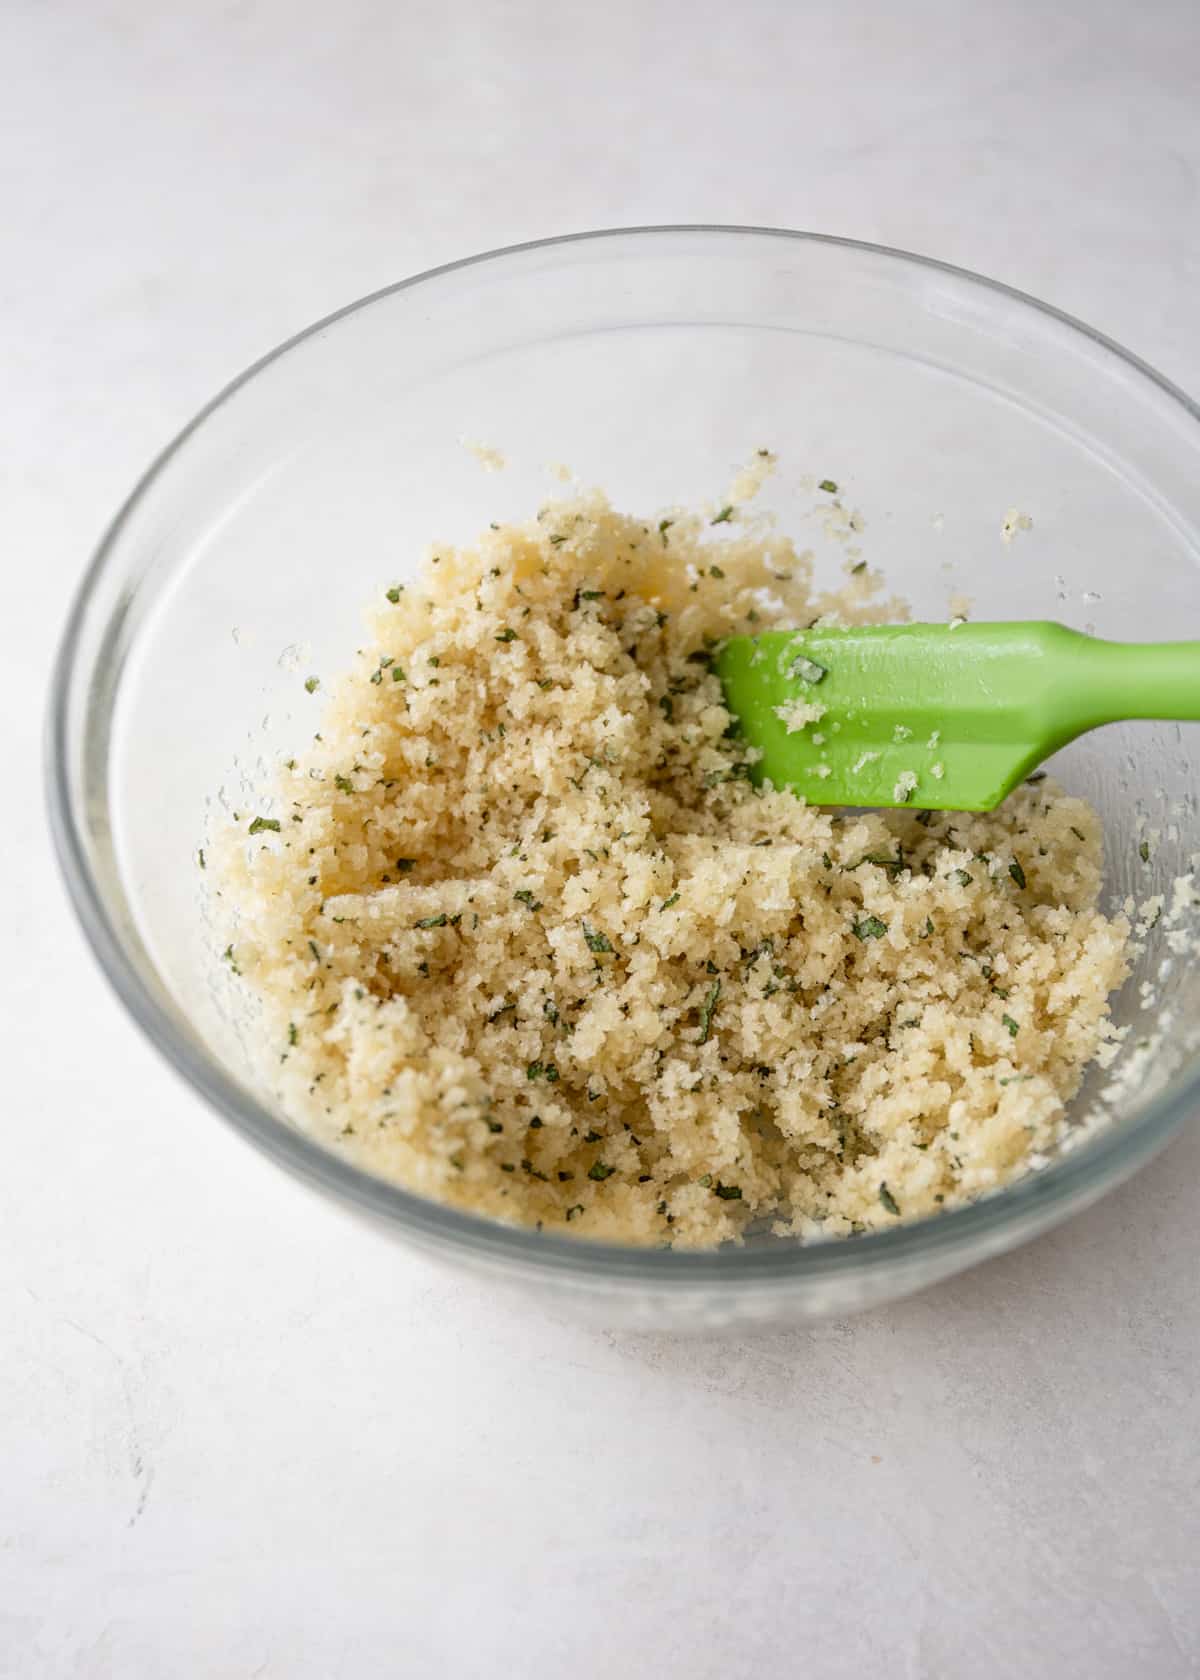 mixing breadcrumb topping for pasta bake in a clear glass bowl